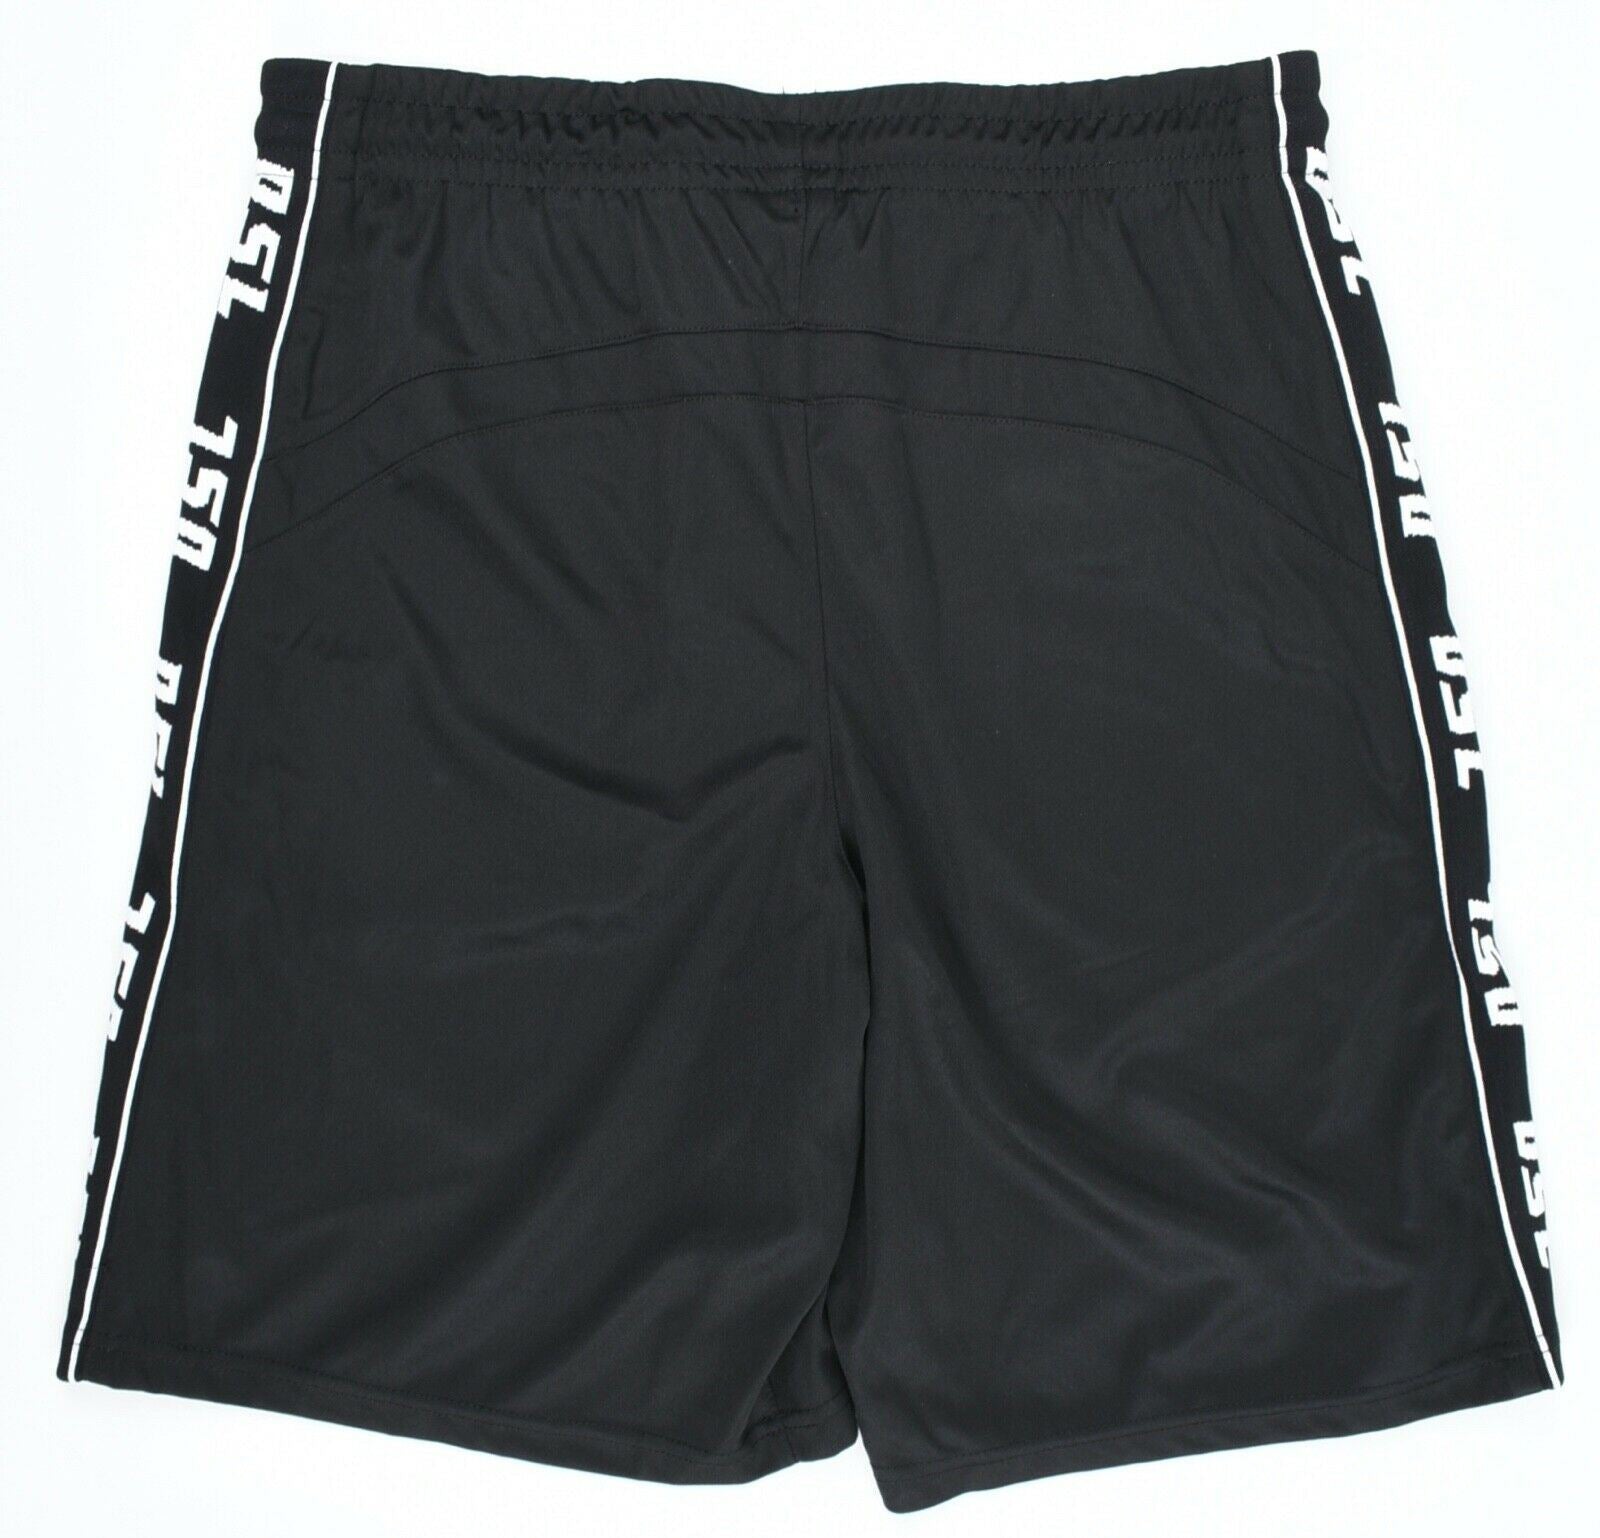 DIESEL Men's HITOSHI Black Shorts, RELAXED FIT, size XL